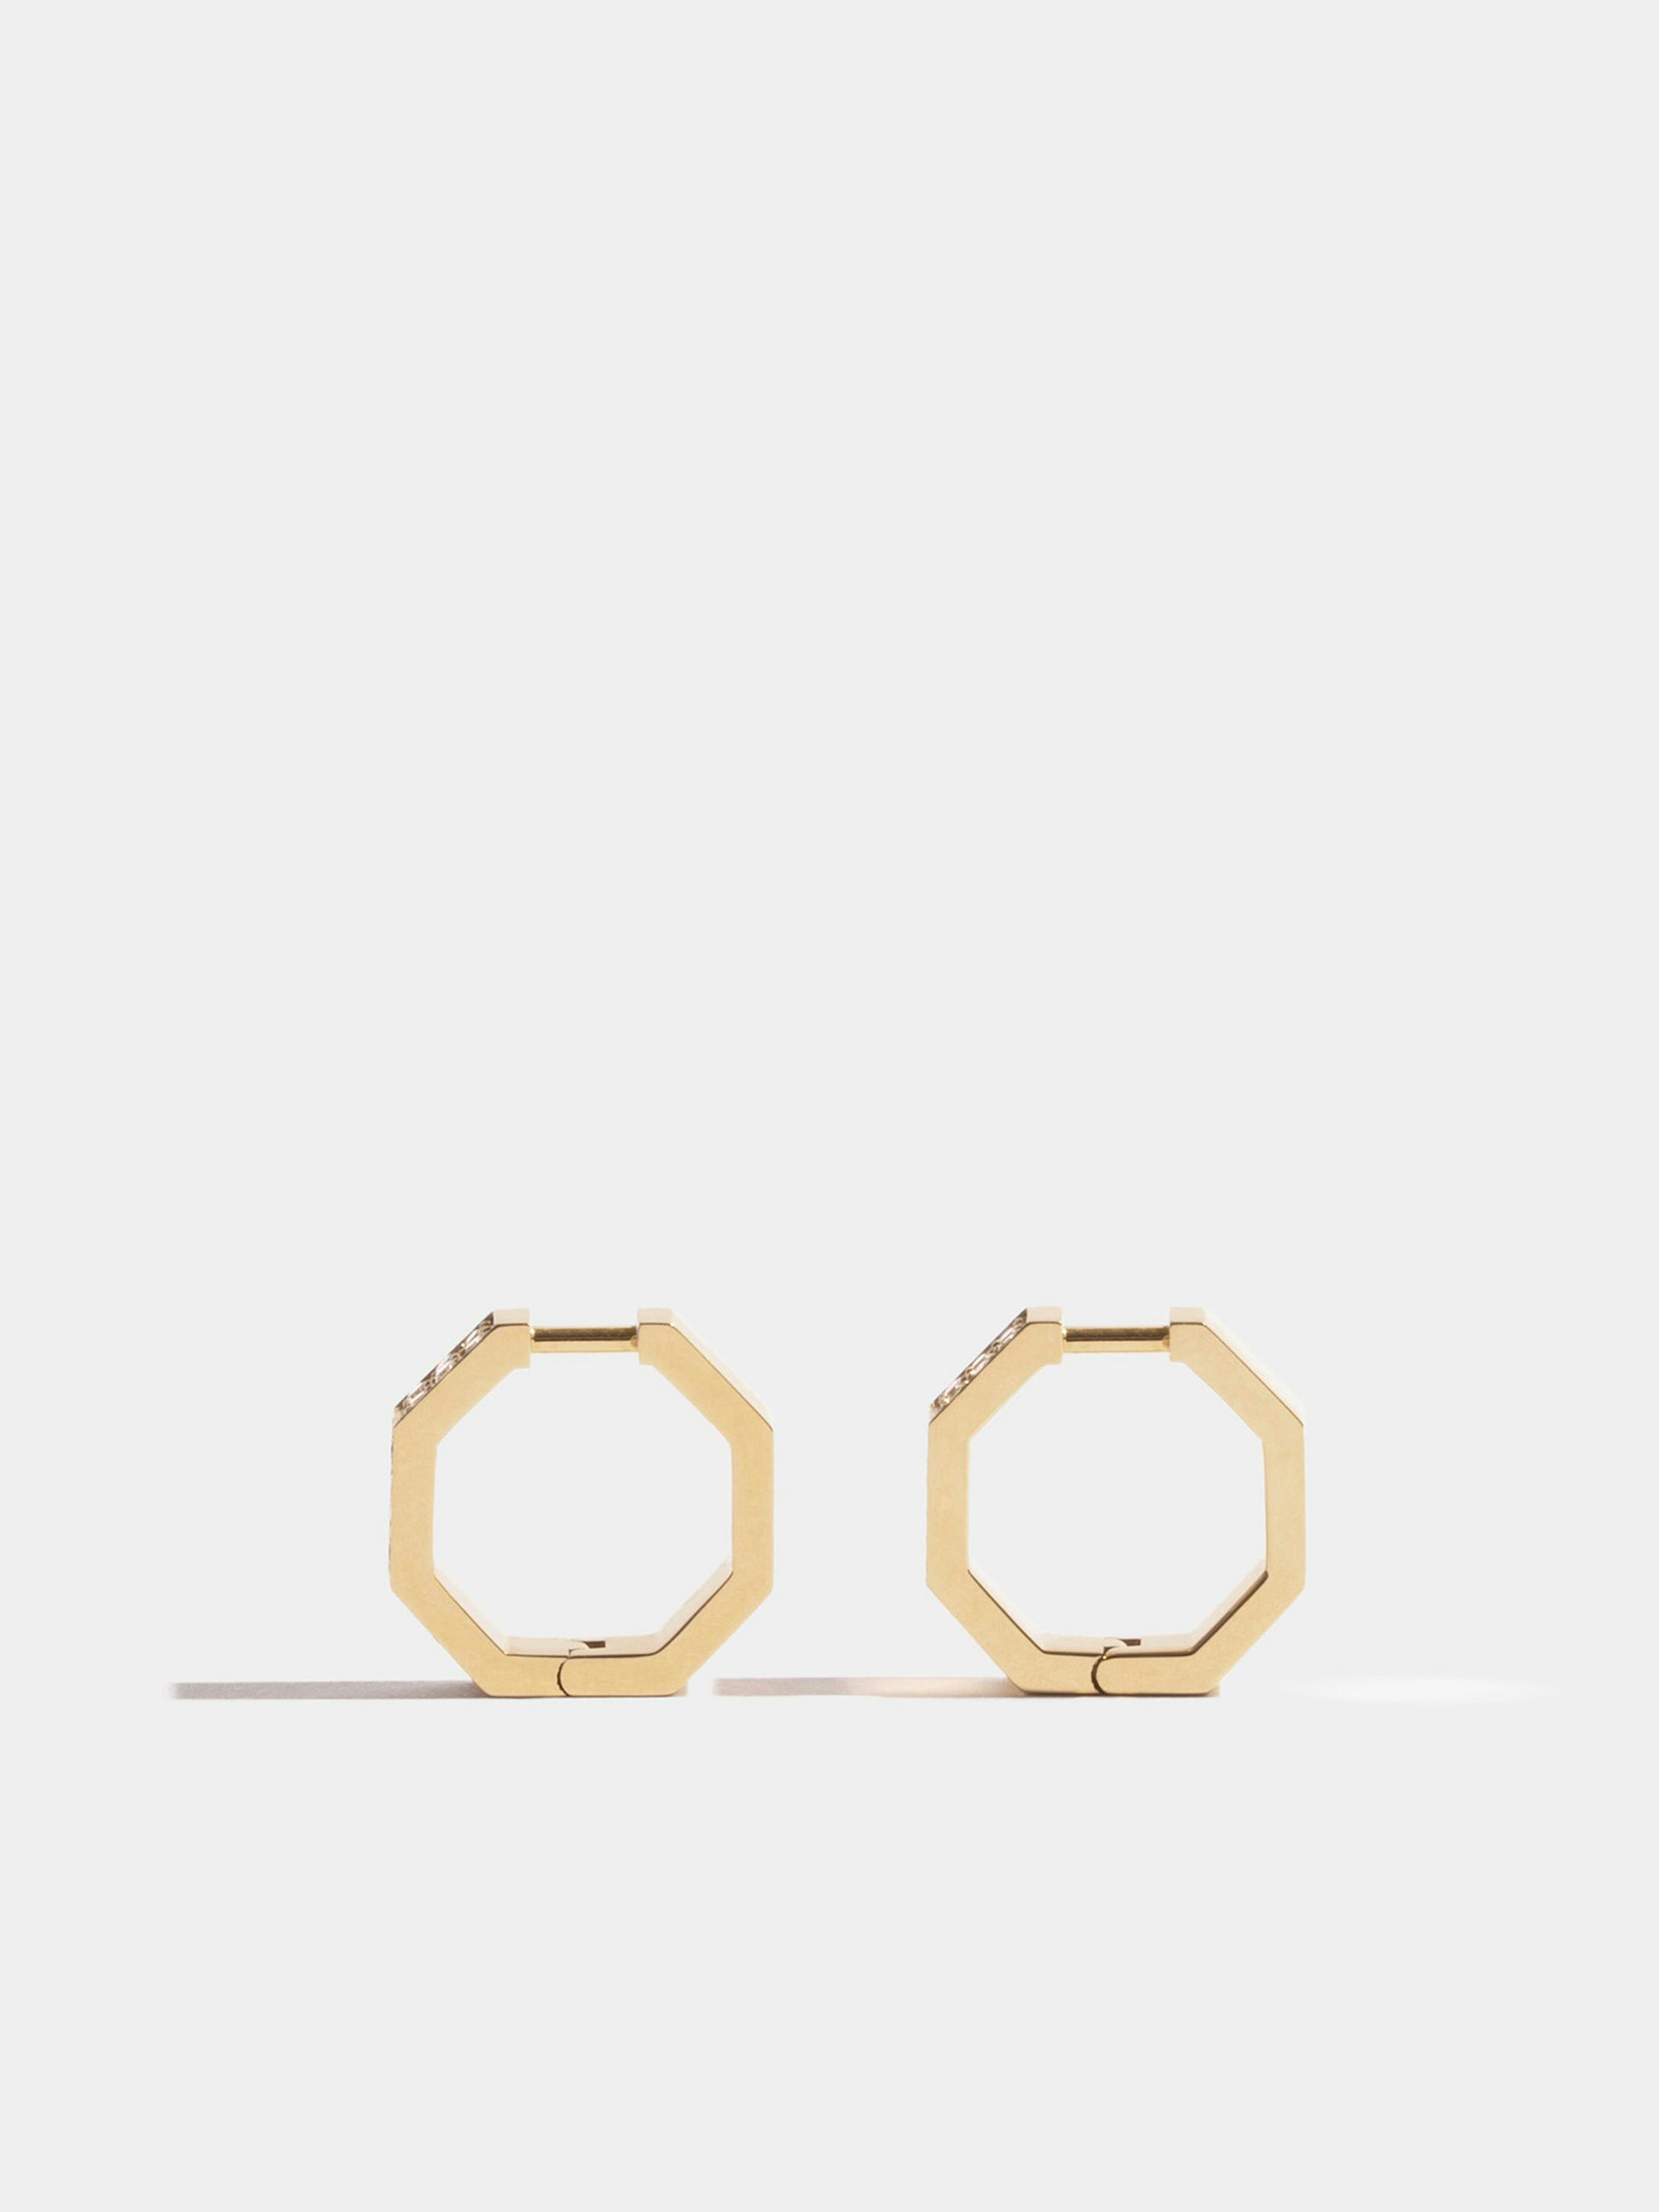 Octogone 13mm earrings in 18k Fairmined ethical yellow gold, paved with lab-grown diamonds, the pair.